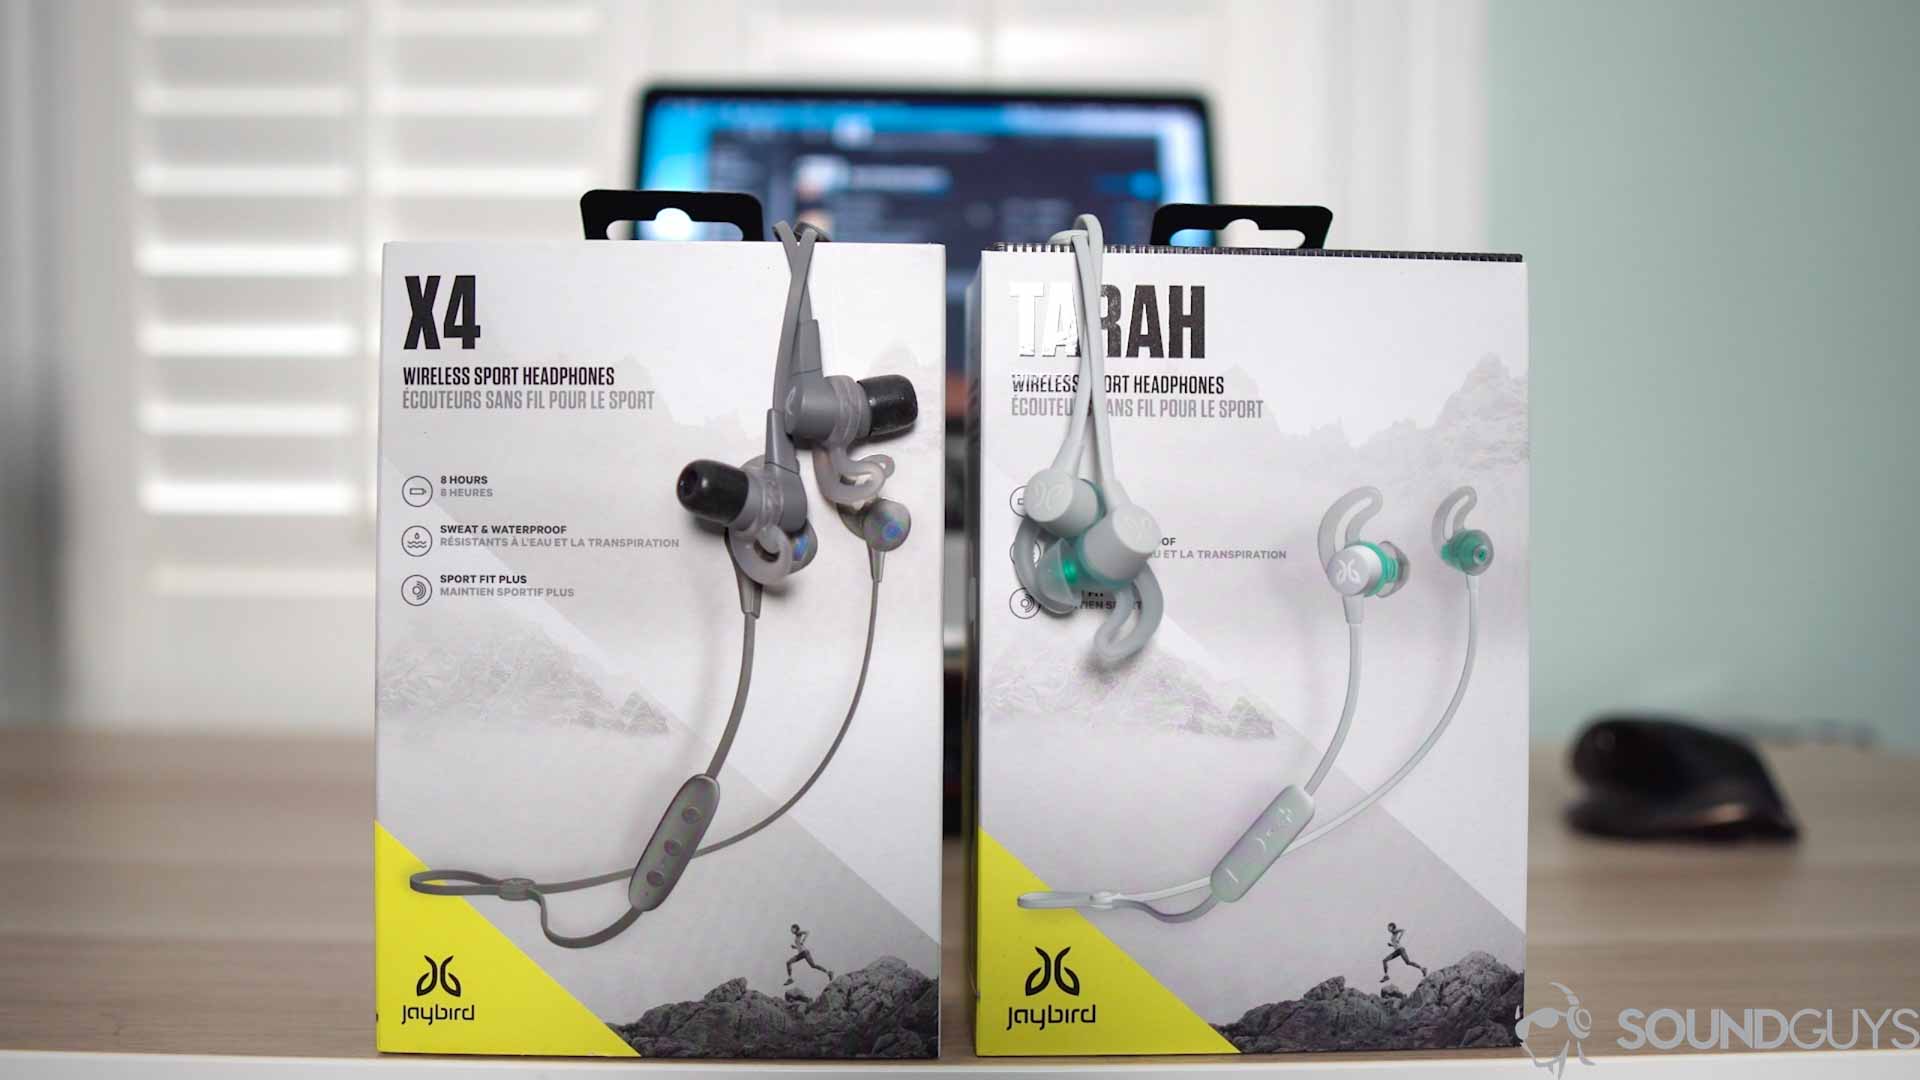 The packaging of the Jaybird Tarah pictured next to the X4 packaging.